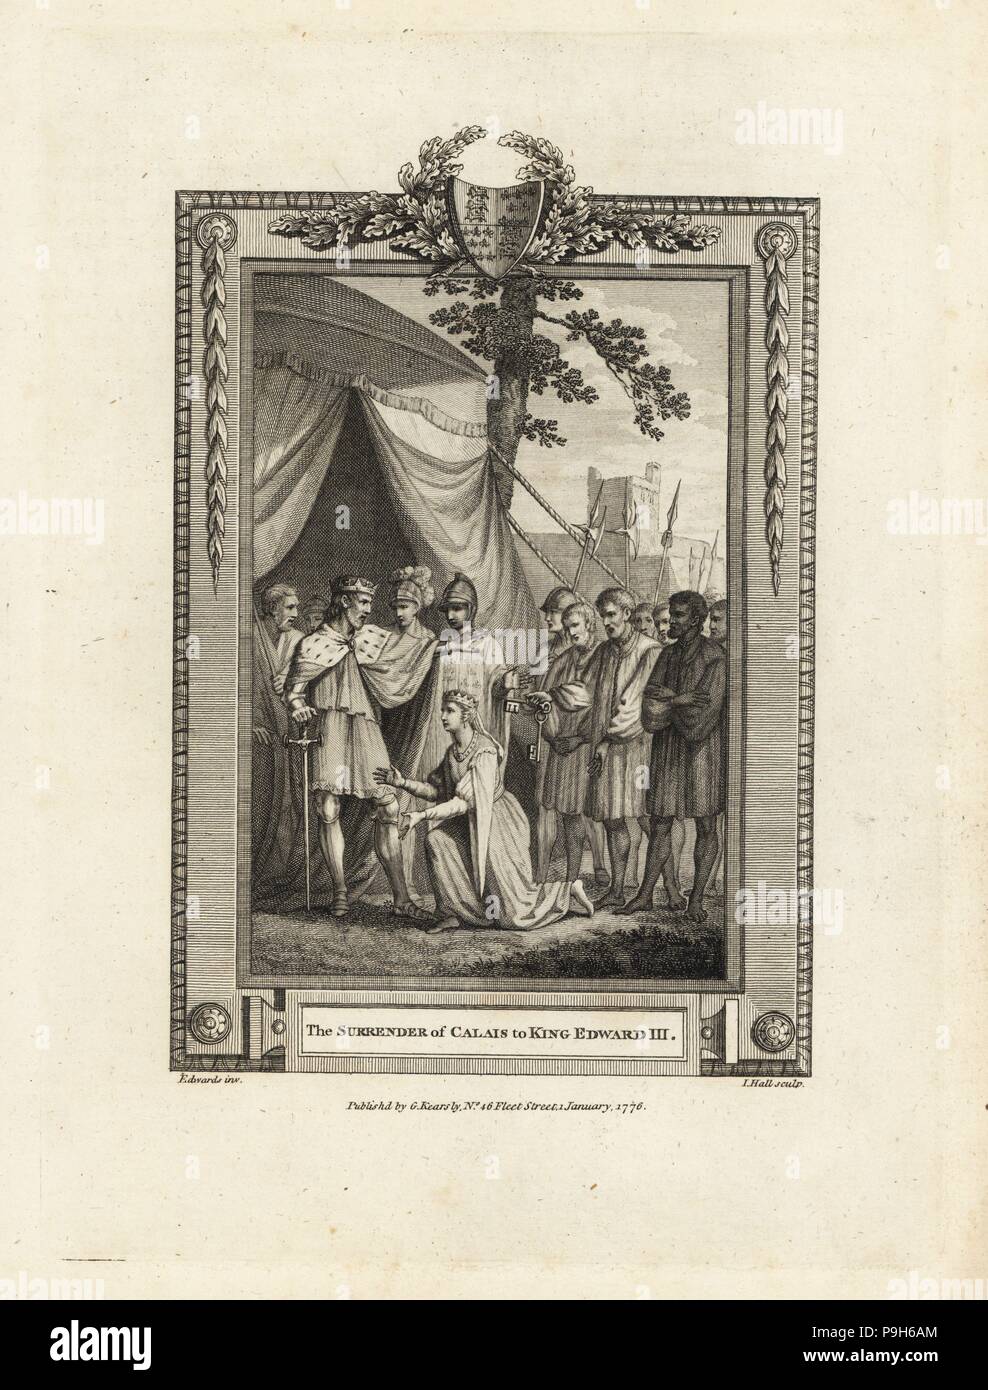 Surrender of Calais to King Edward III, 1347. Copperplate engraving by J. Hall after an illustration by Edwards from The Copper Plate Magazine or Monthly Treasure, G. Kearsley, London, 1778. Stock Photo